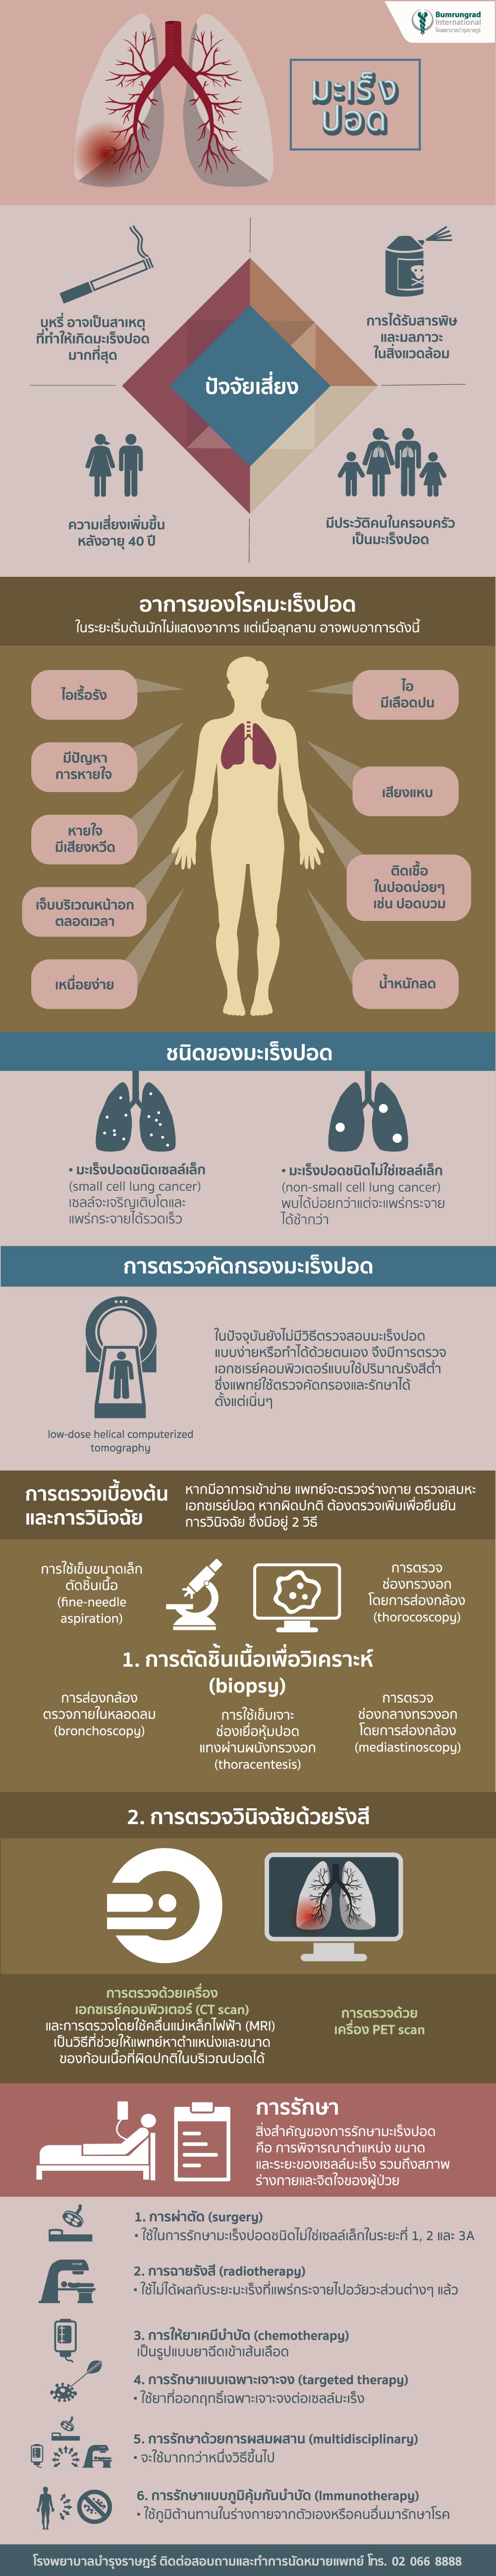 Lung-Cancer-infographic-01.jpg